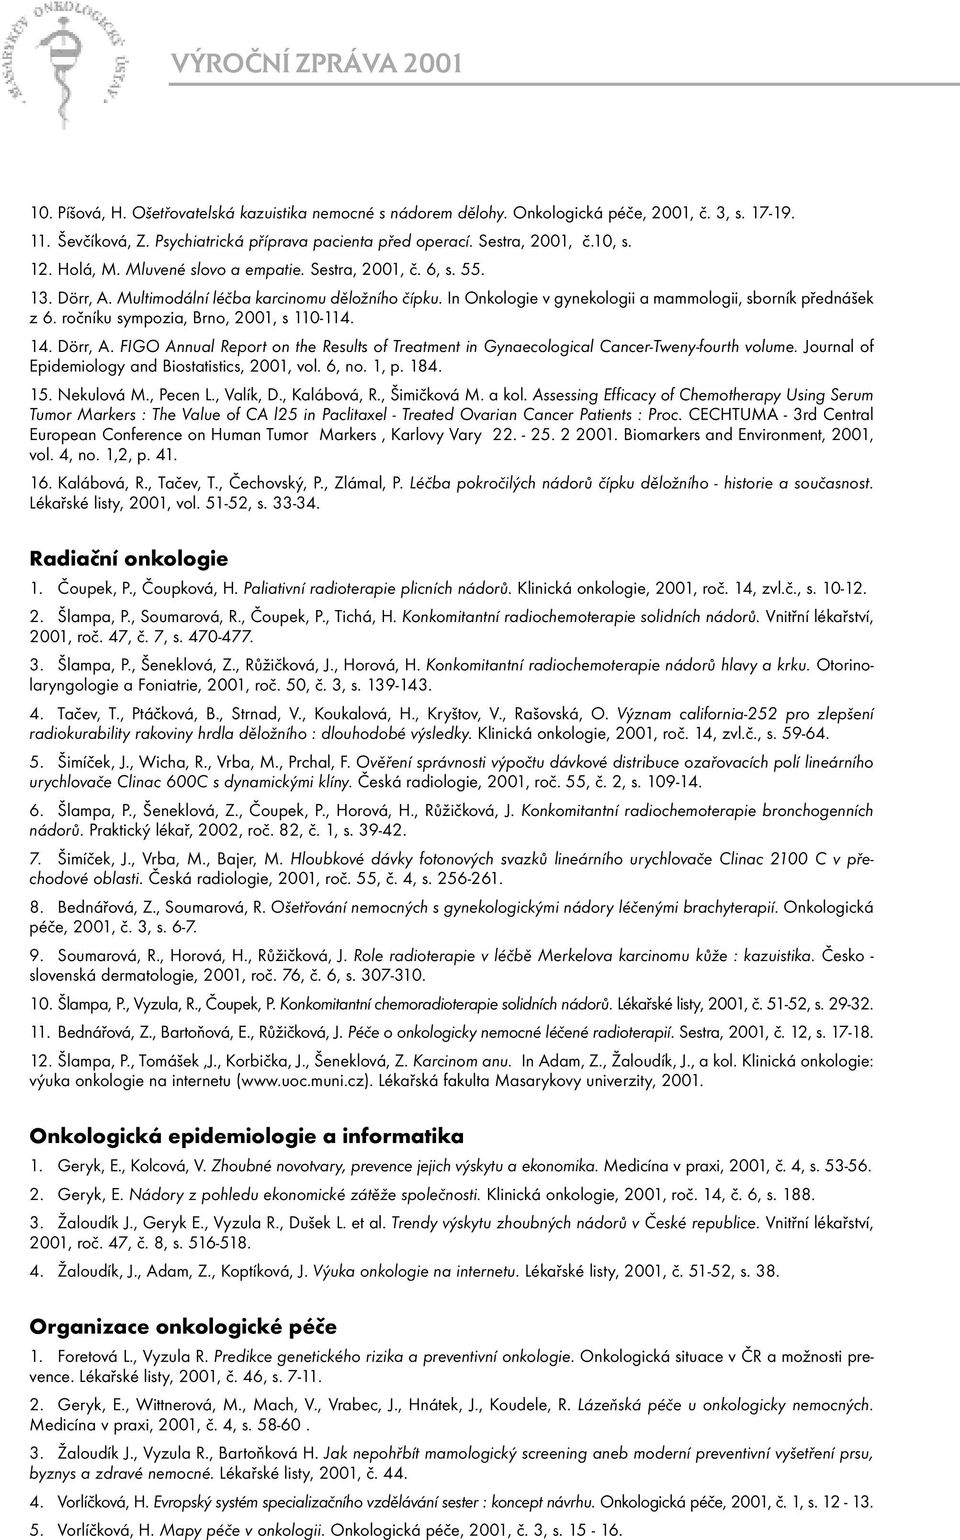 ročníku sympozia, Brno, 2001, s 110-114. 14. Dörr, A. FIGO Annual Report on the Results of Treatment in Gynaecological Cancer-Tweny-fourth volume. Journal of Epidemiology and Biostatistics, 2001, vol.